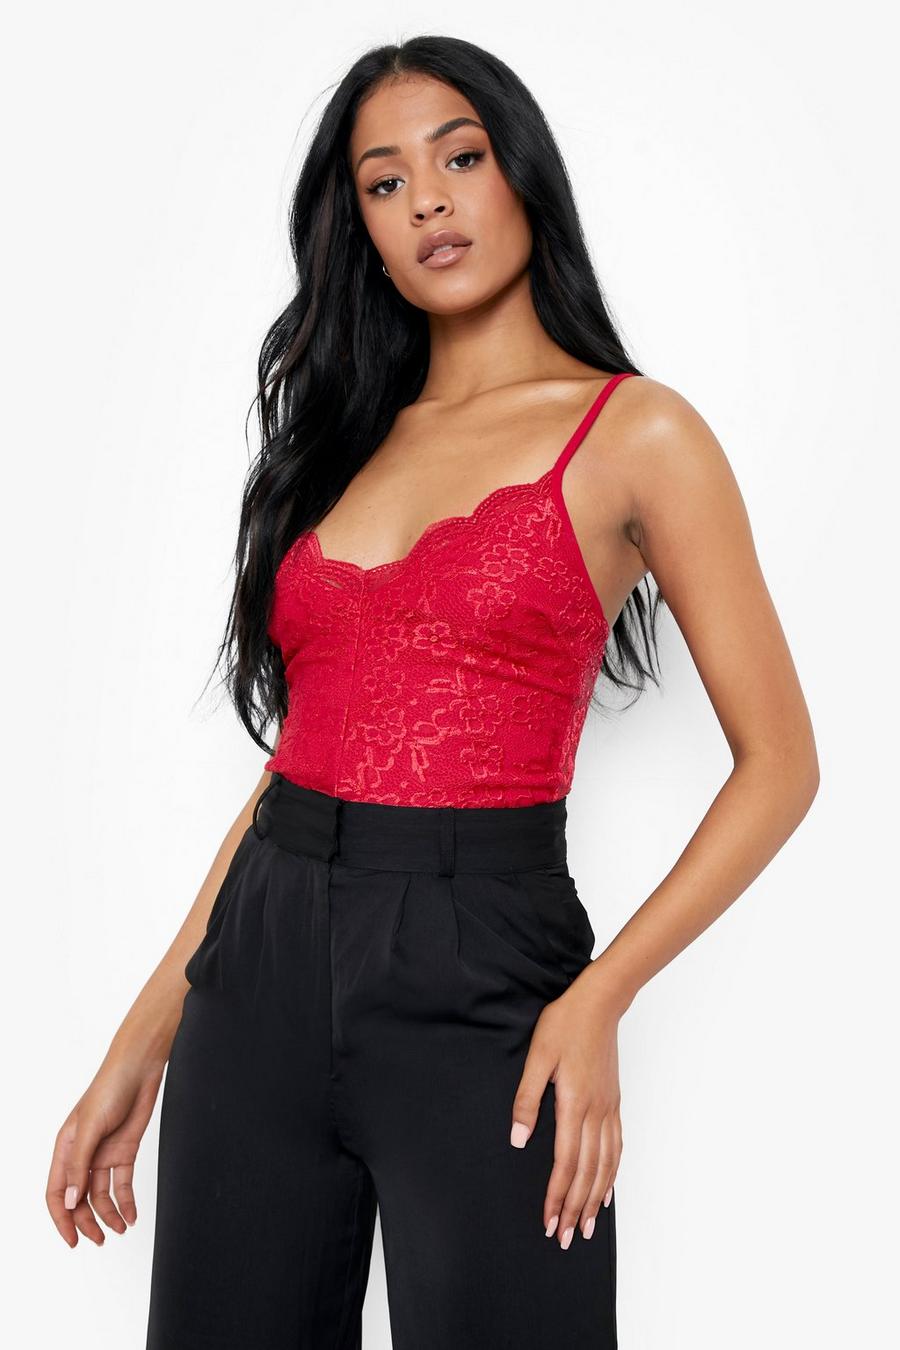 Red lace bodysuit and black jeans